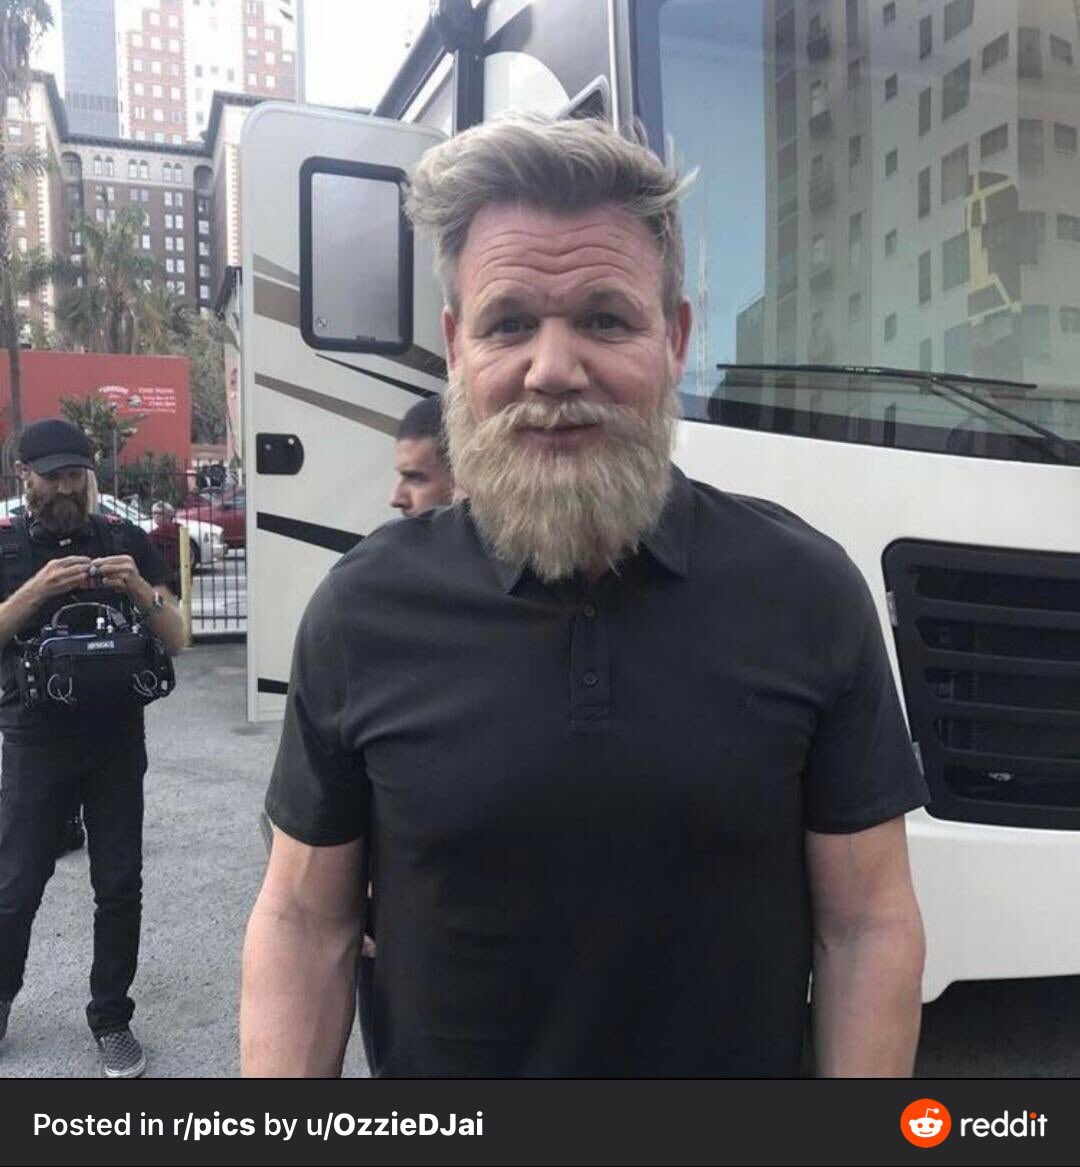 Are we going to ignore that Gordon Ramsay with a beard looks just like @fl0mtv ? https://t.co/RA0bHDiZkR